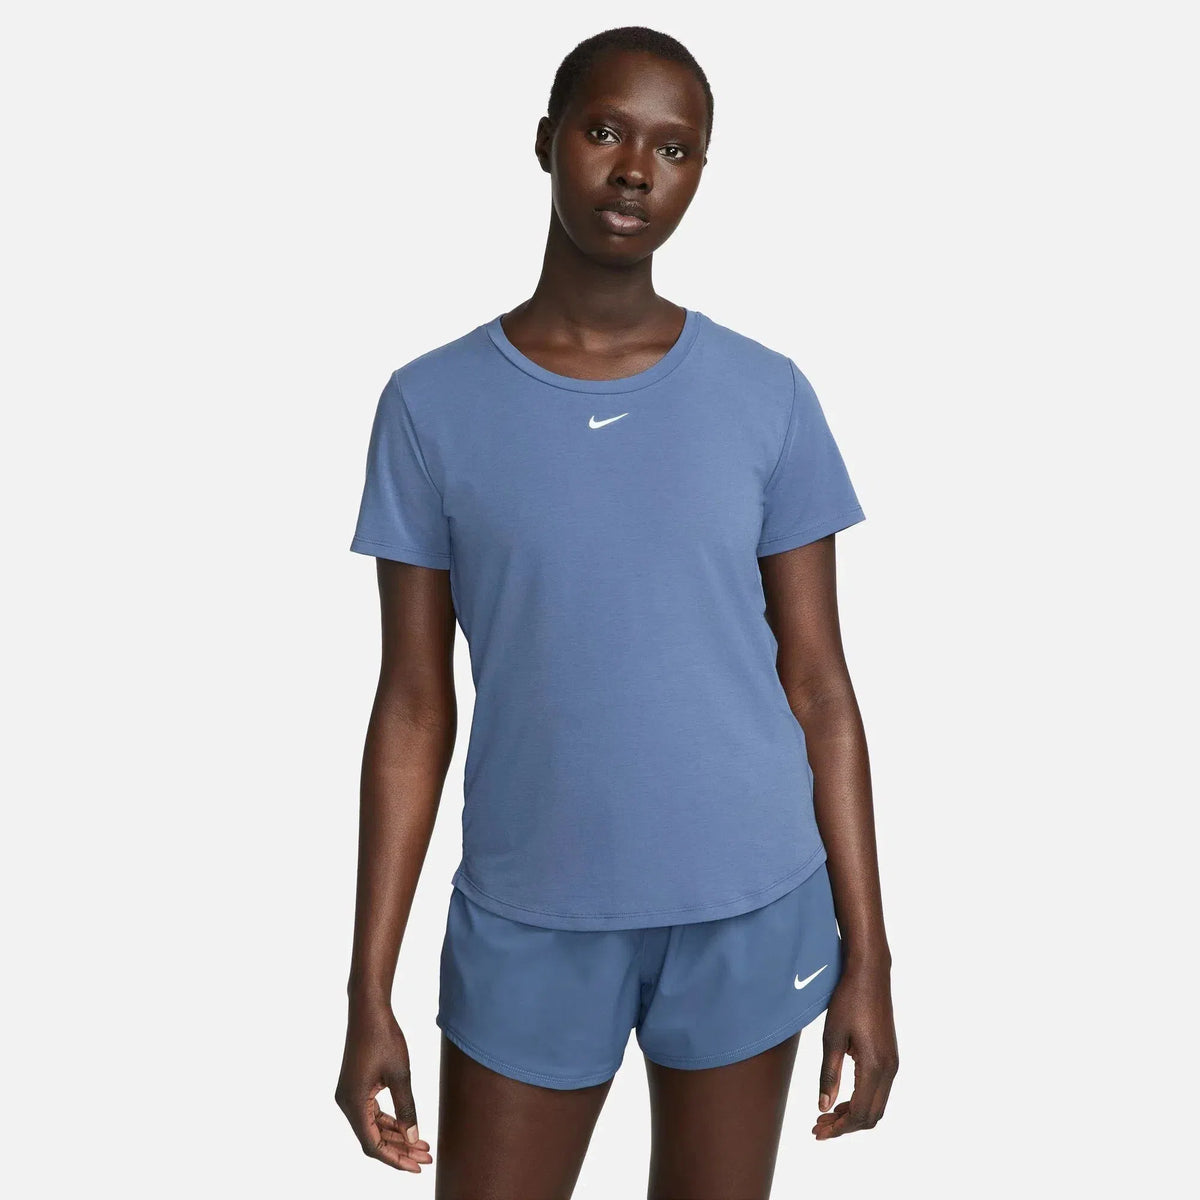 Nike-Women's Nike Dri-FIT UV One Luxe-Diffused Blue/Reflective Silv-Pacers Running